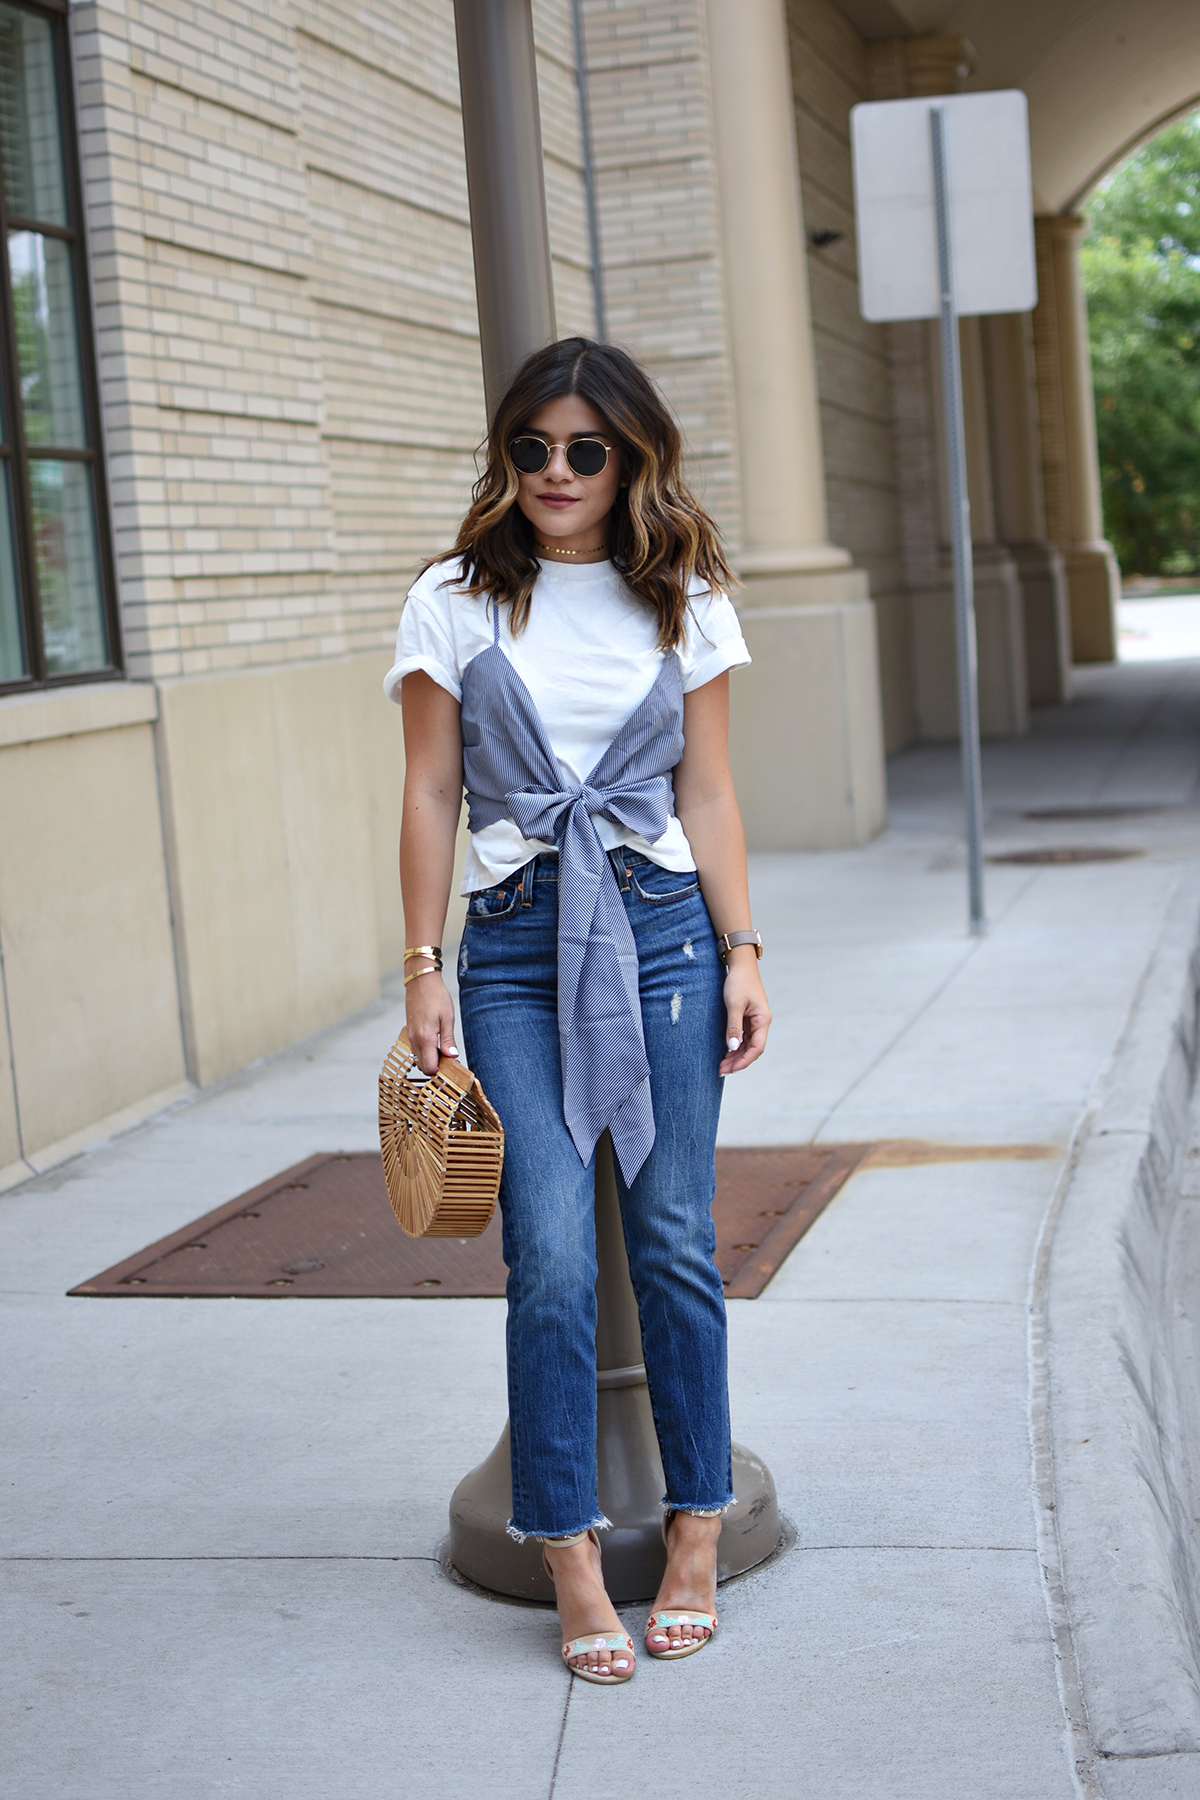 Nordstrom anniversary sale 2017. Carolina Hellal of Chic Talk wearing a Chicwish top and levi's 501 jeans